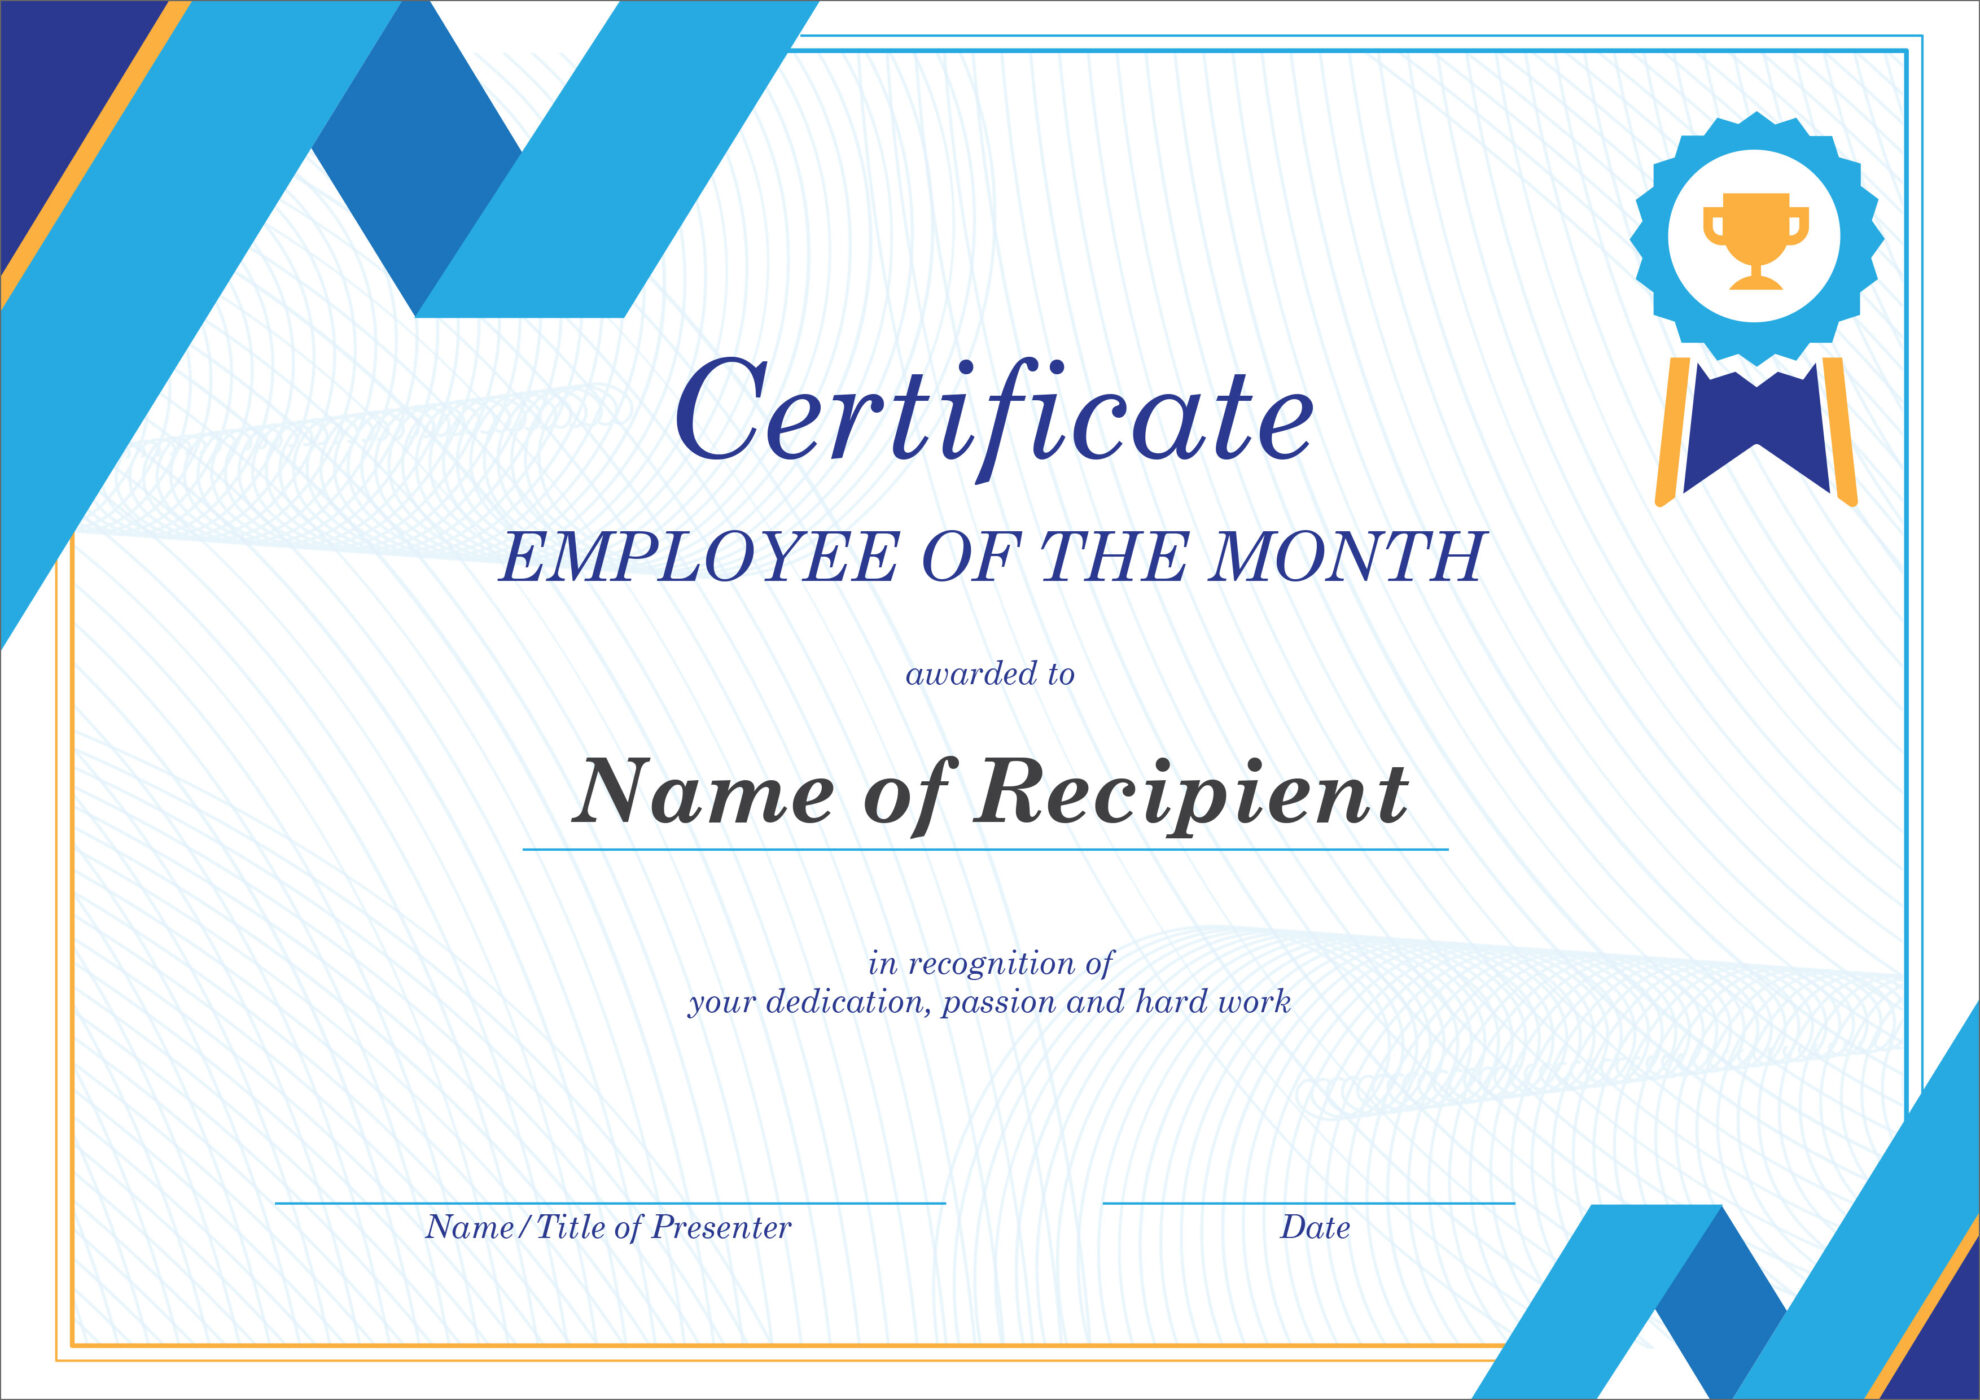 50-free-creative-blank-certificate-templates-in-psd-for-leadership